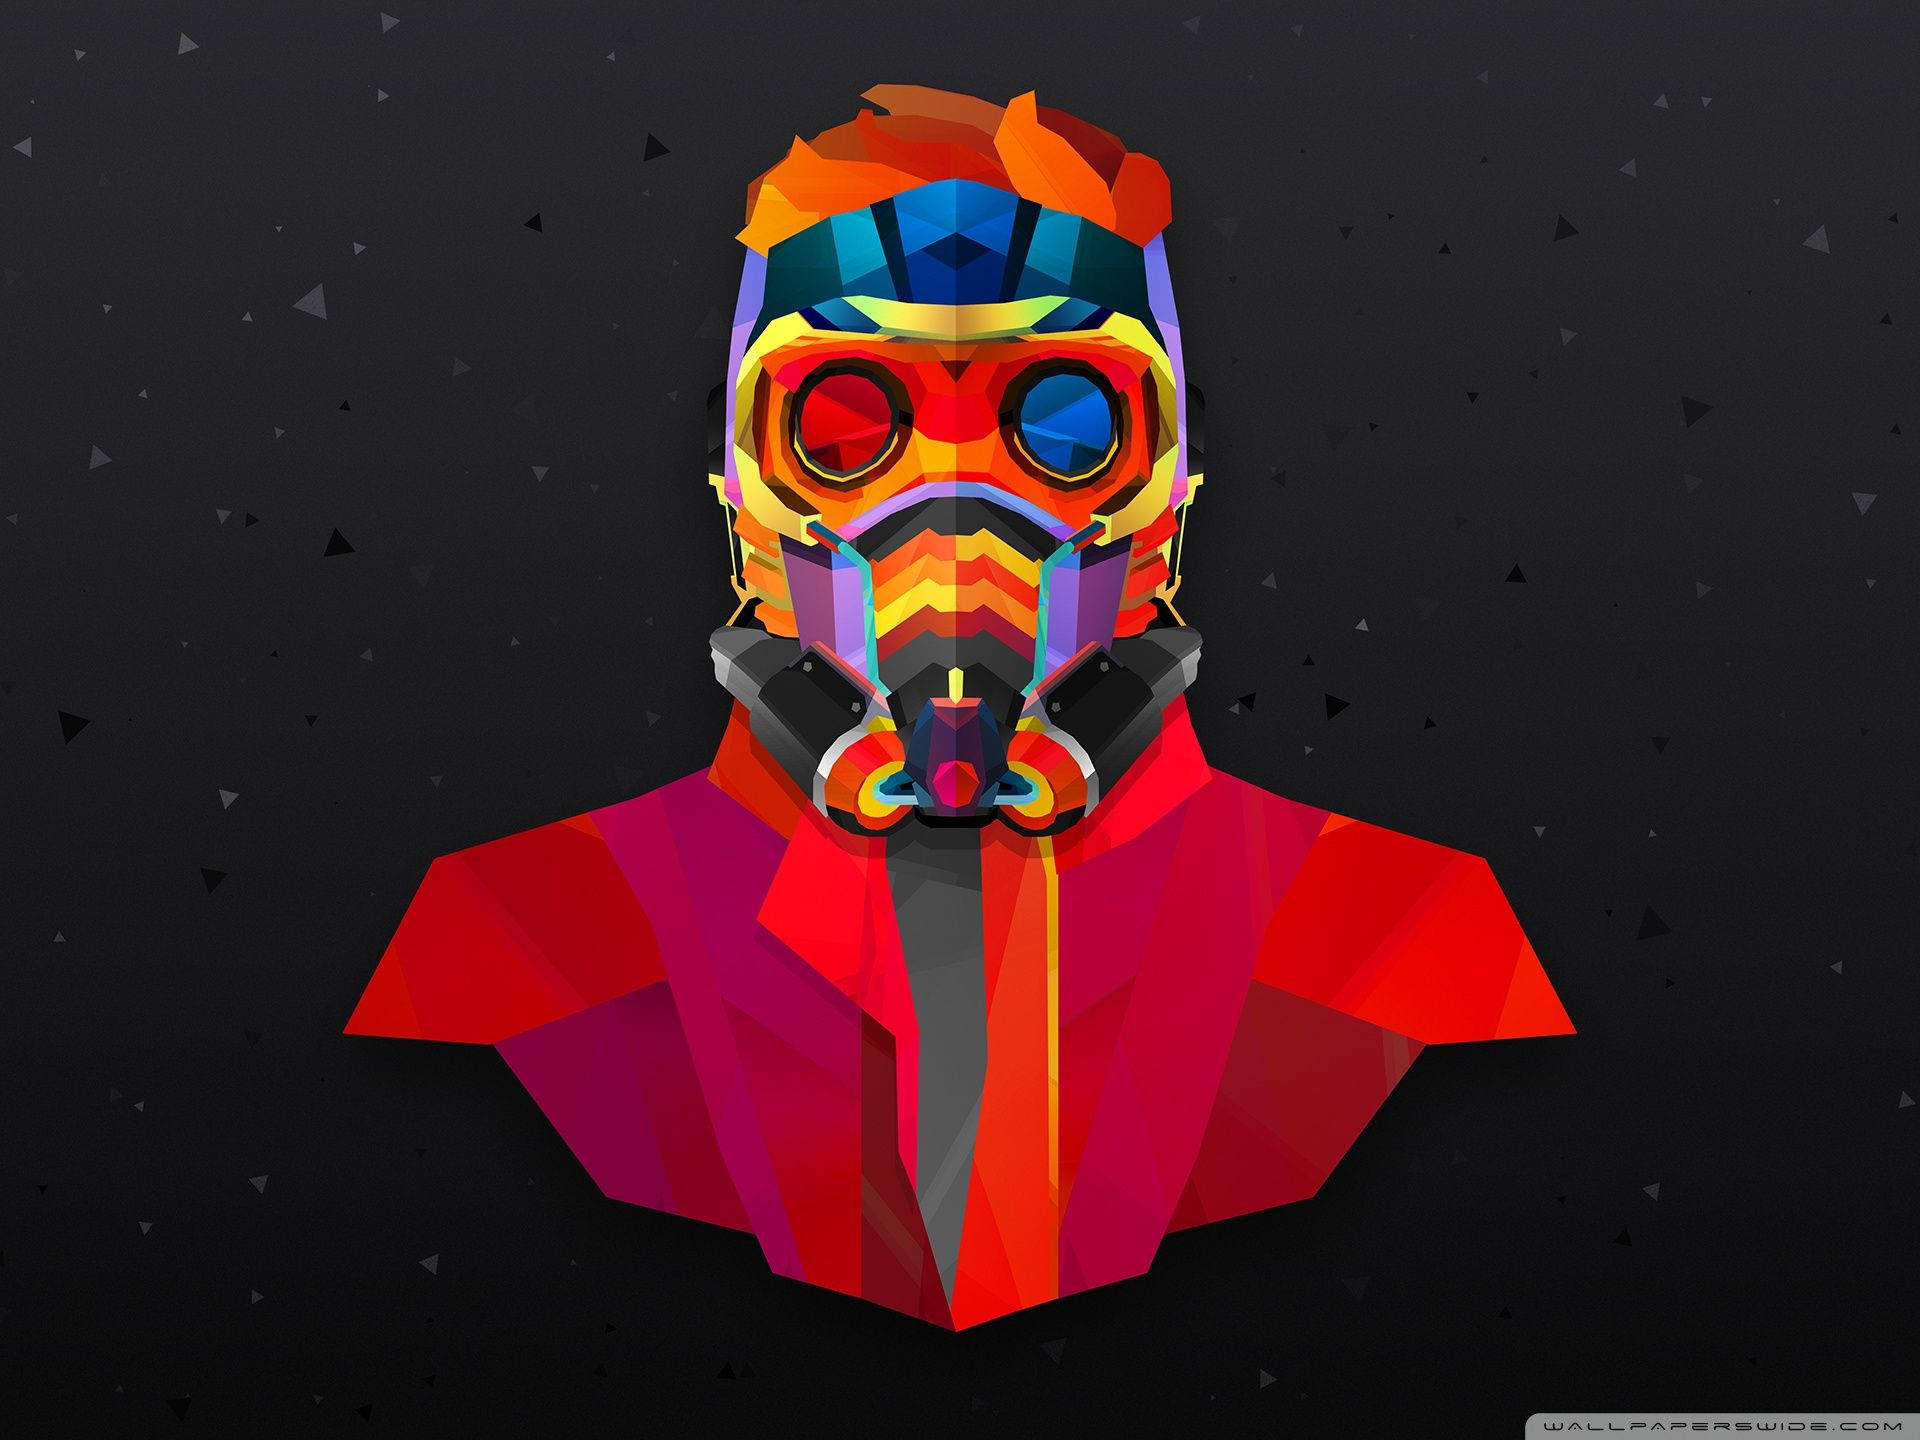 Abstract art of a man with mask and a red orange shirt in black background with triangles from Guardians of the galaxy.